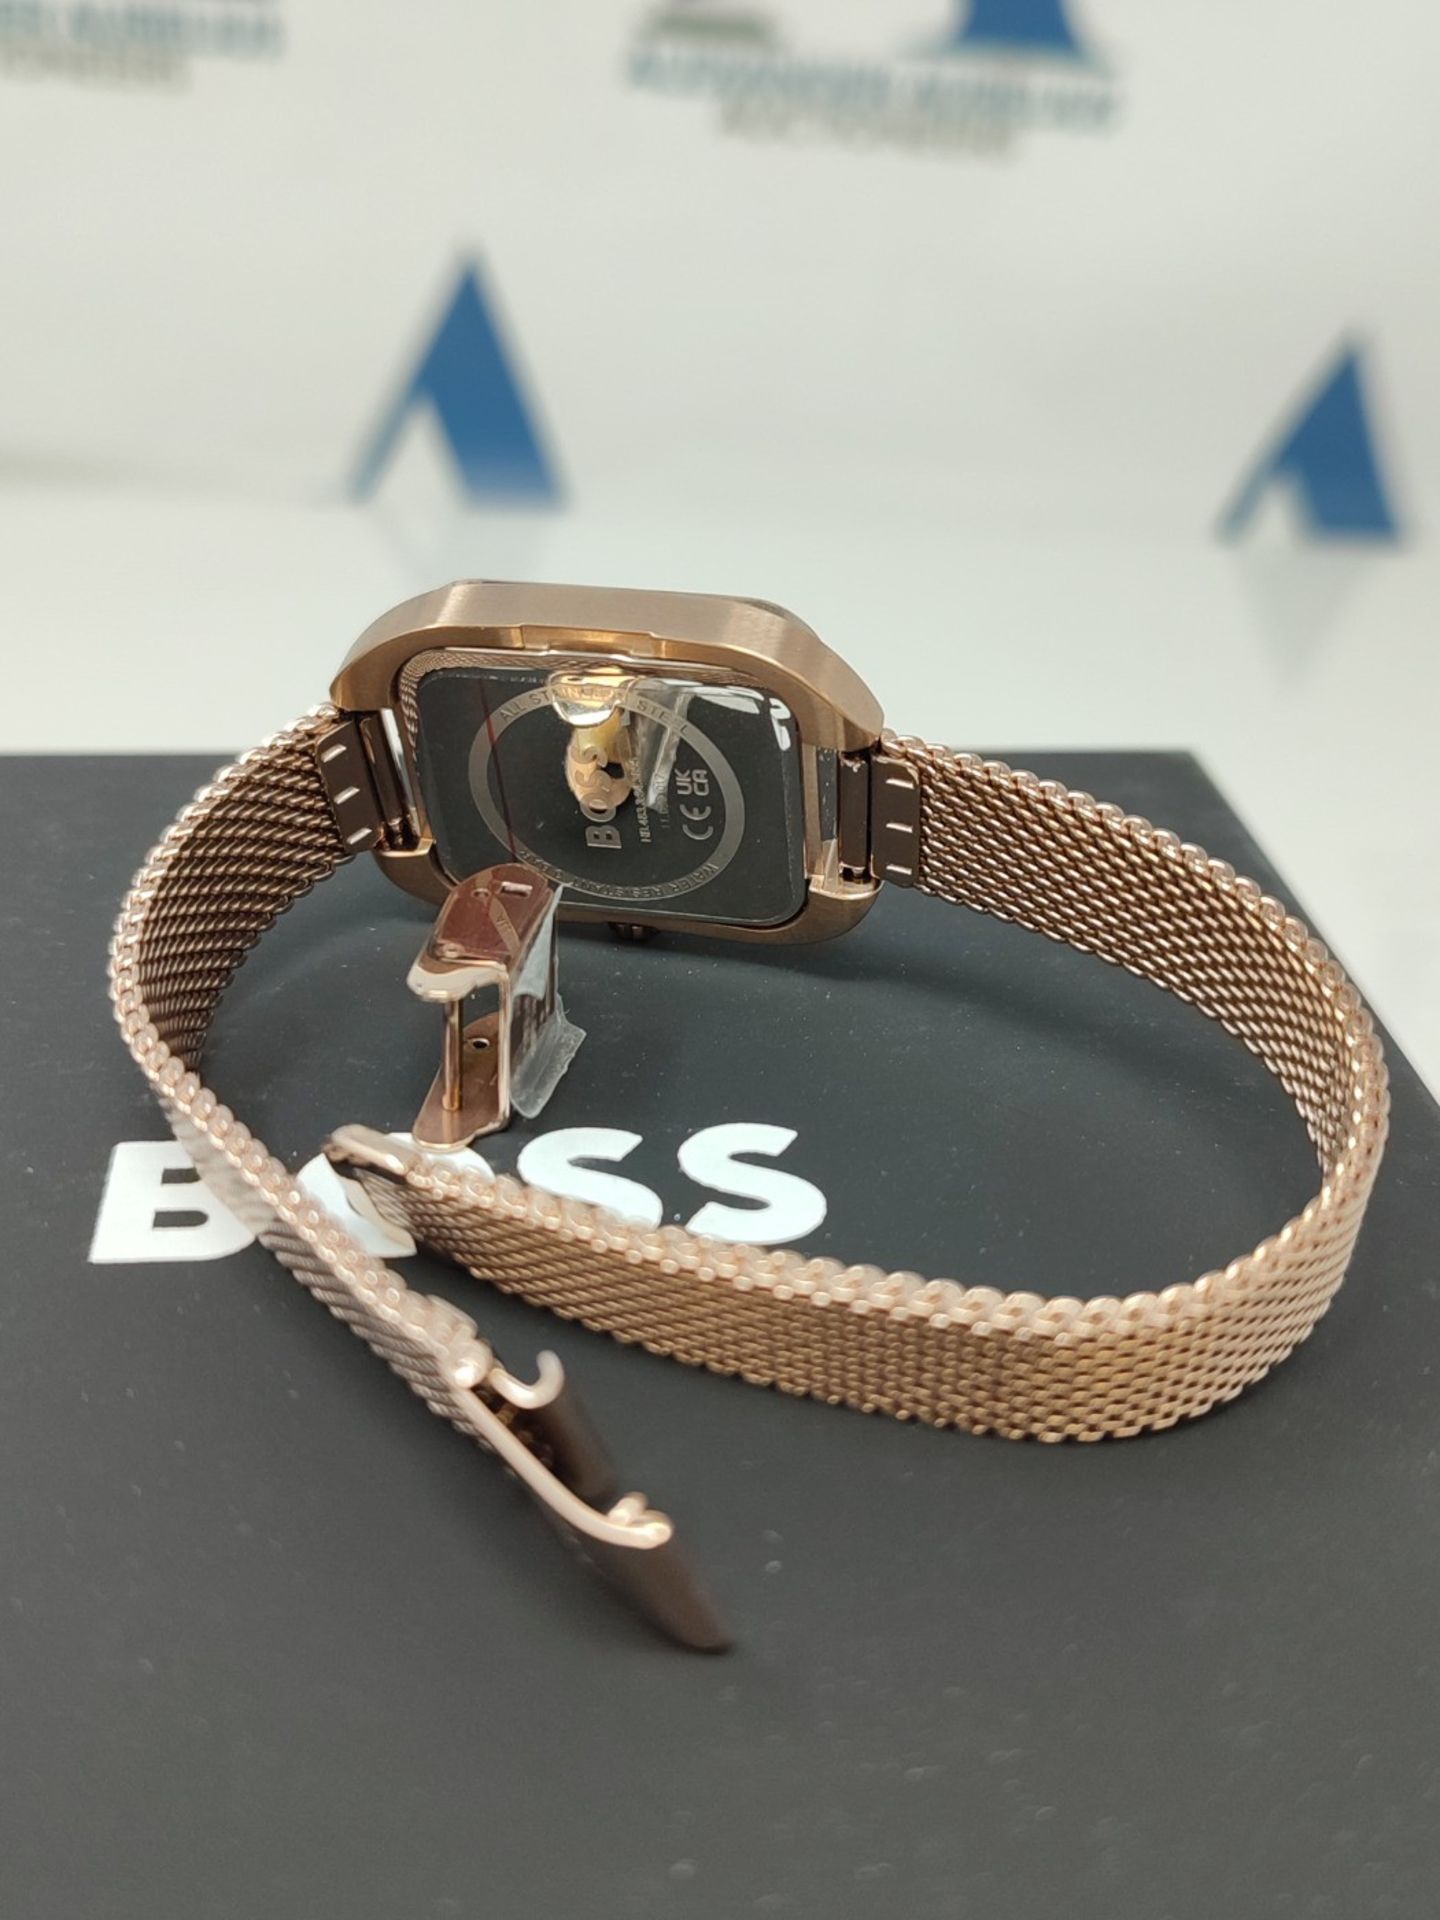 RRP £279.00 BOSS Analog quartz watch for women with rose gold stainless steel bracelet - 1502683 - Image 3 of 3